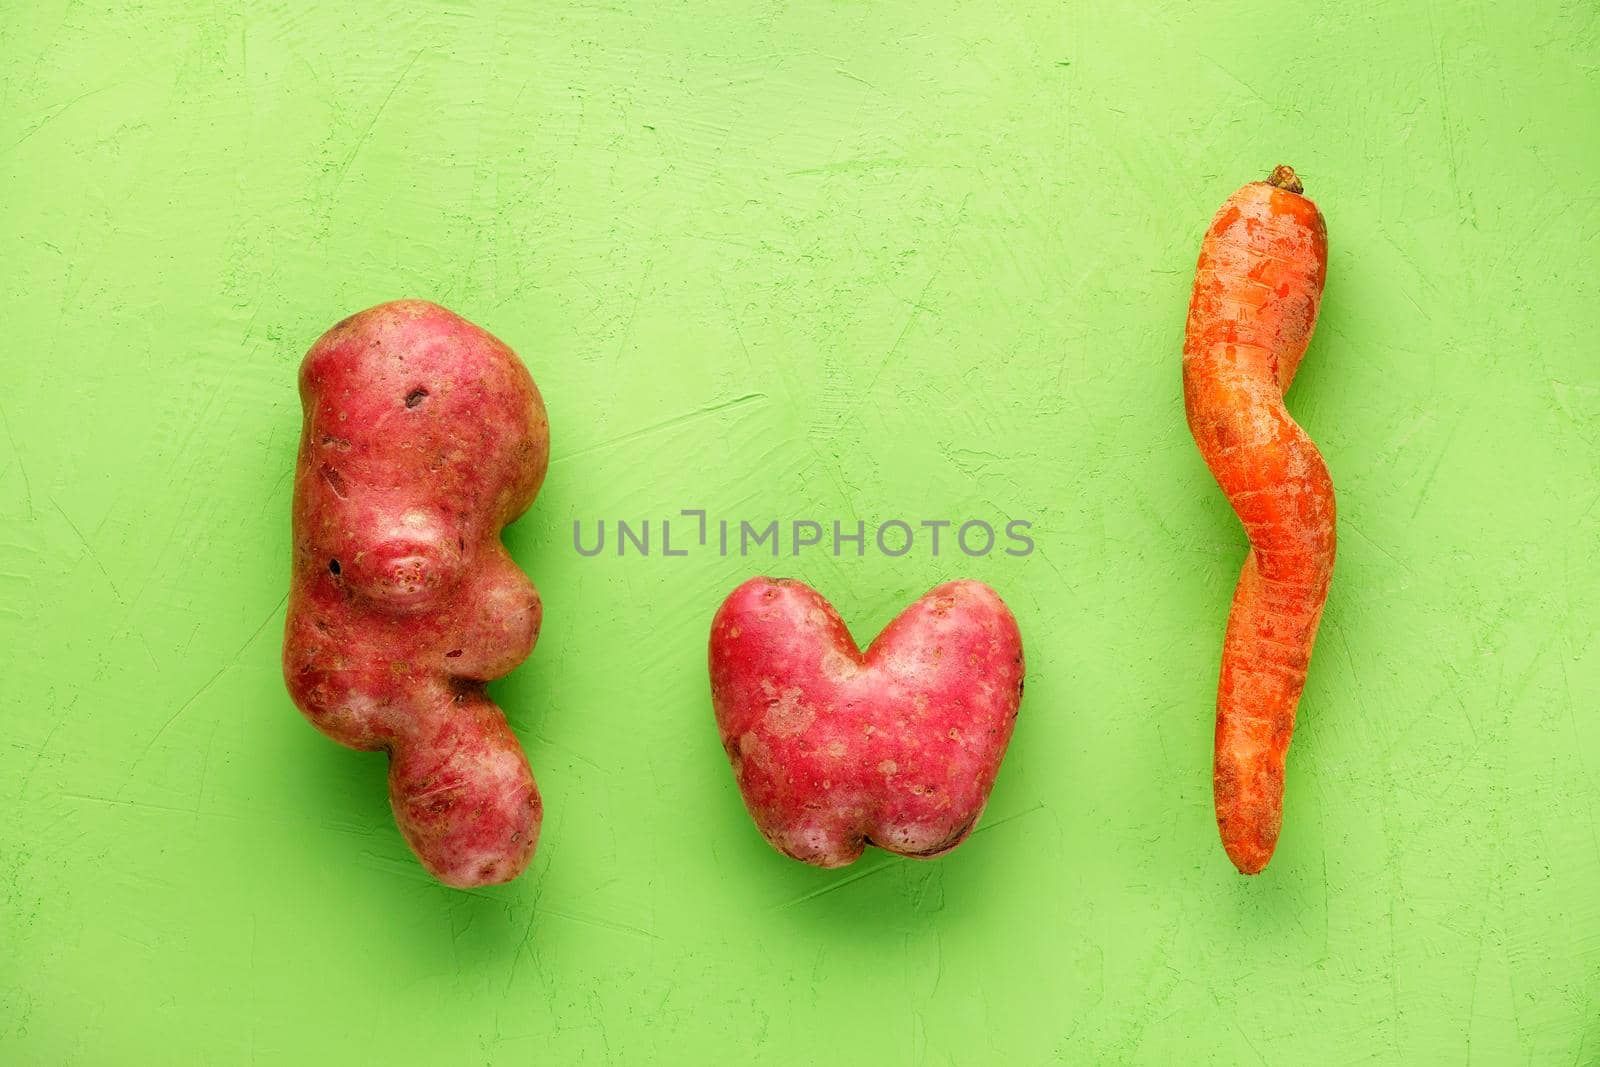 Ugly potatoes and carrots on a background of green plaster. Vegetable or food waste concept. Top view, close-up. by Sergii